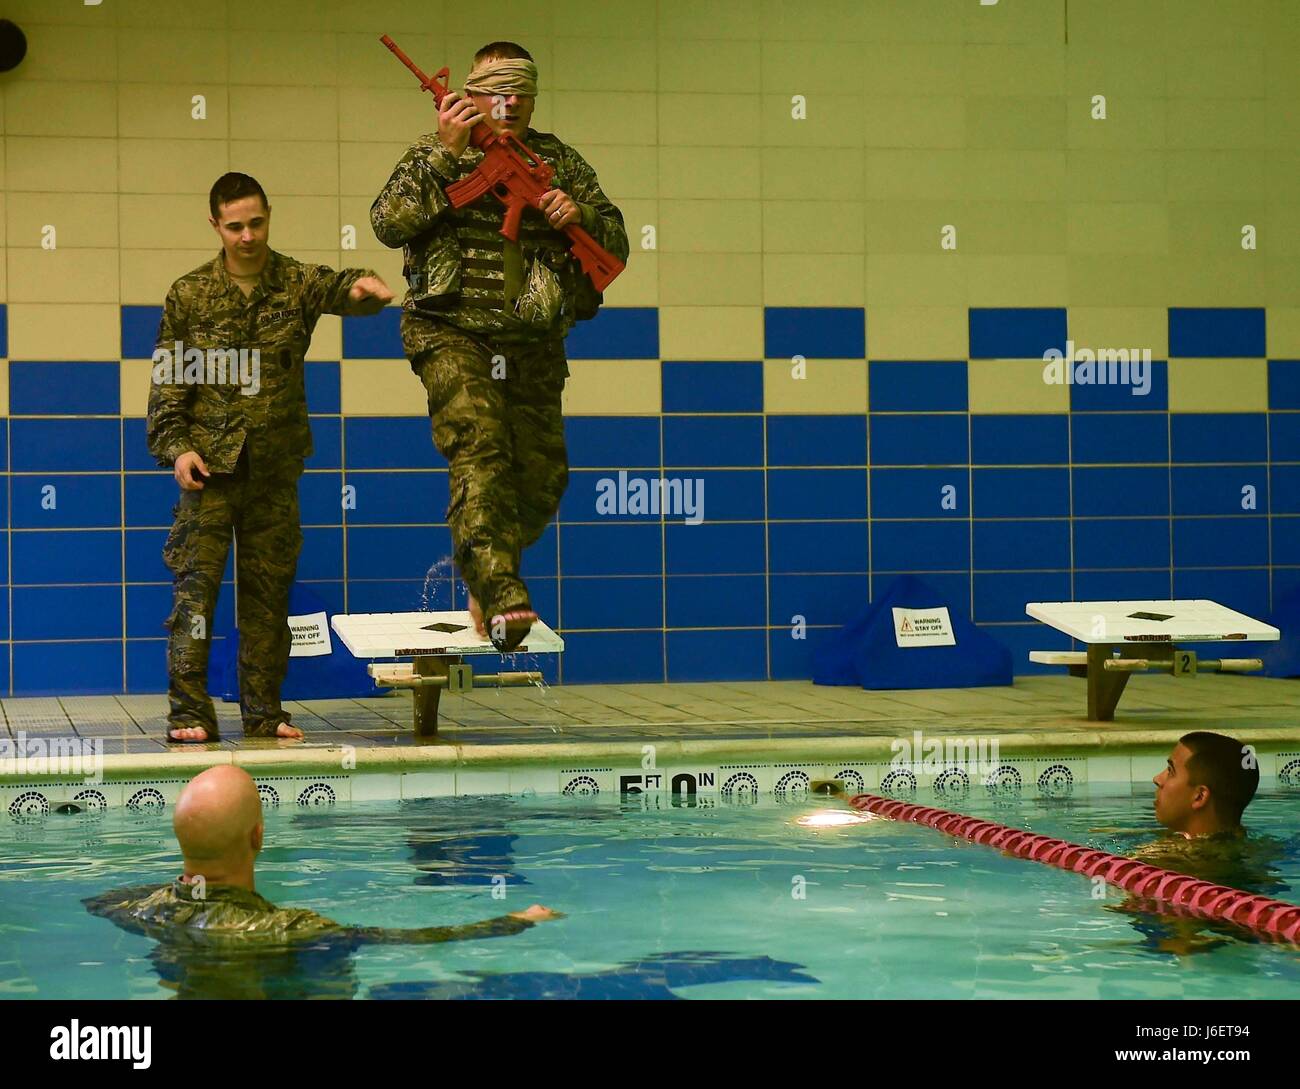 U.S. Air Force Tech. Sgt. Daniel Day, 633rd Security Forces flight chief, conducts water confidence training during a training evaluation at Joint Base Langley-Eustis, Va., April 28, 2017. To accomplish this training evolution, Day had to strip-off his combat vest and recover his weapon after jumping into the Shellbank Fitness Center pool blindfolded. (U.S. Air Force photo/Senior Airman Derek Seifert) Stock Photo